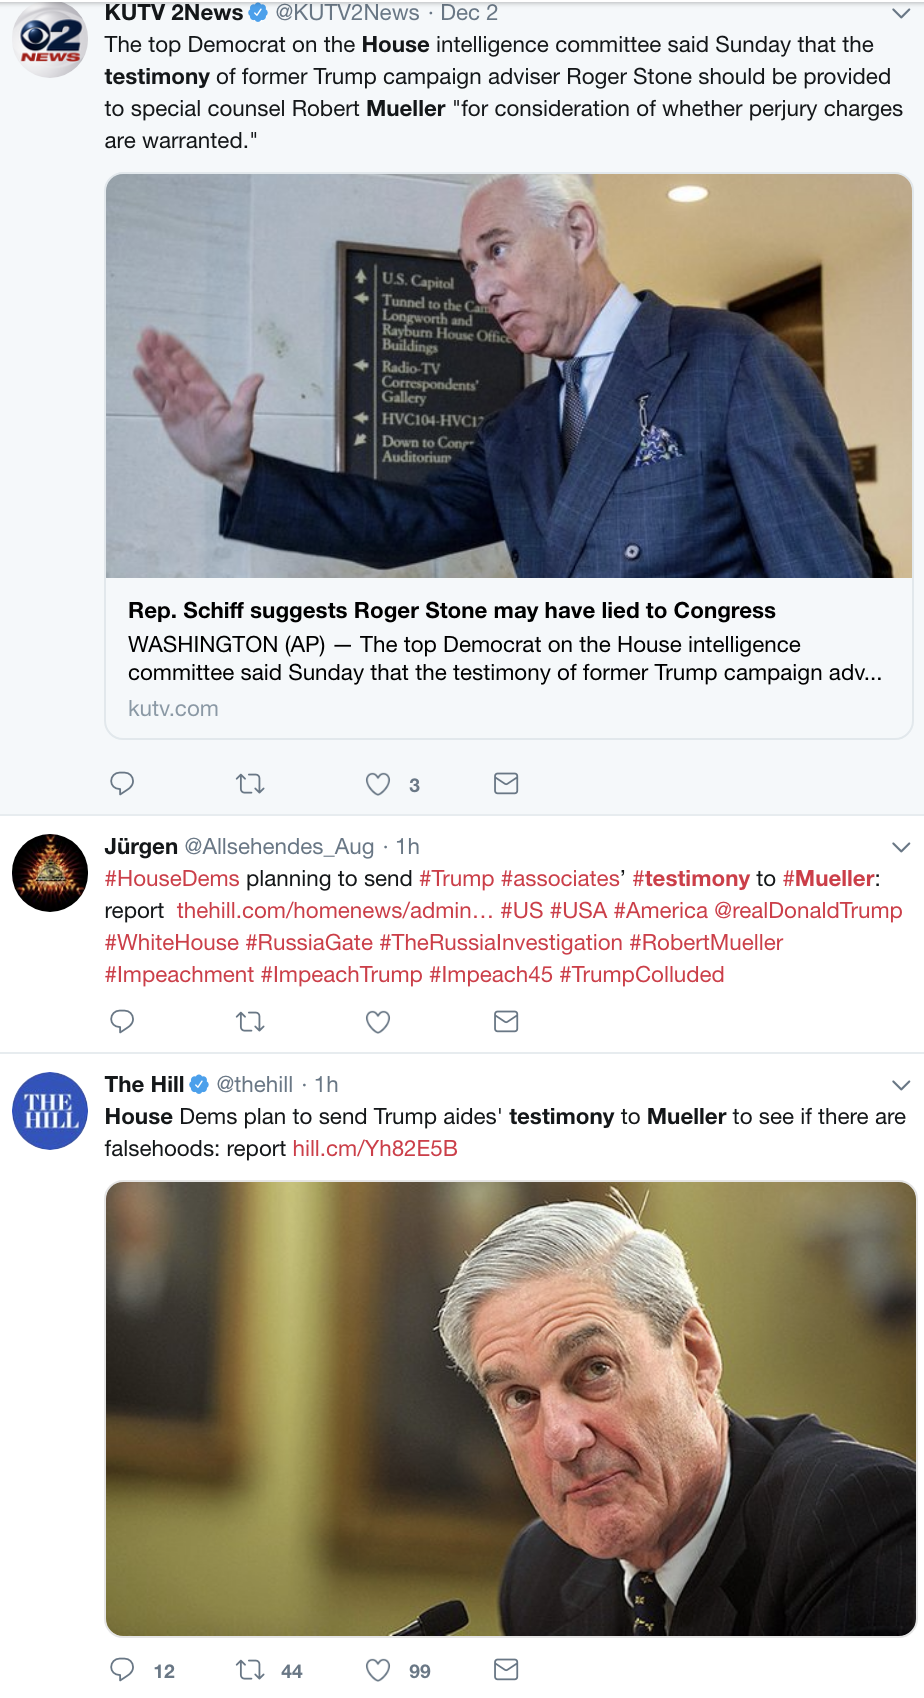 Screen-Shot-2018-12-06-at-8.49.16-AM.png?zoom=2 Kushner Testimony Is In Mueller's Hands - Donald On The Edge Corruption Crime Donald Trump Election 2016 Mueller Politics Robert Mueller Russia Top Stories 